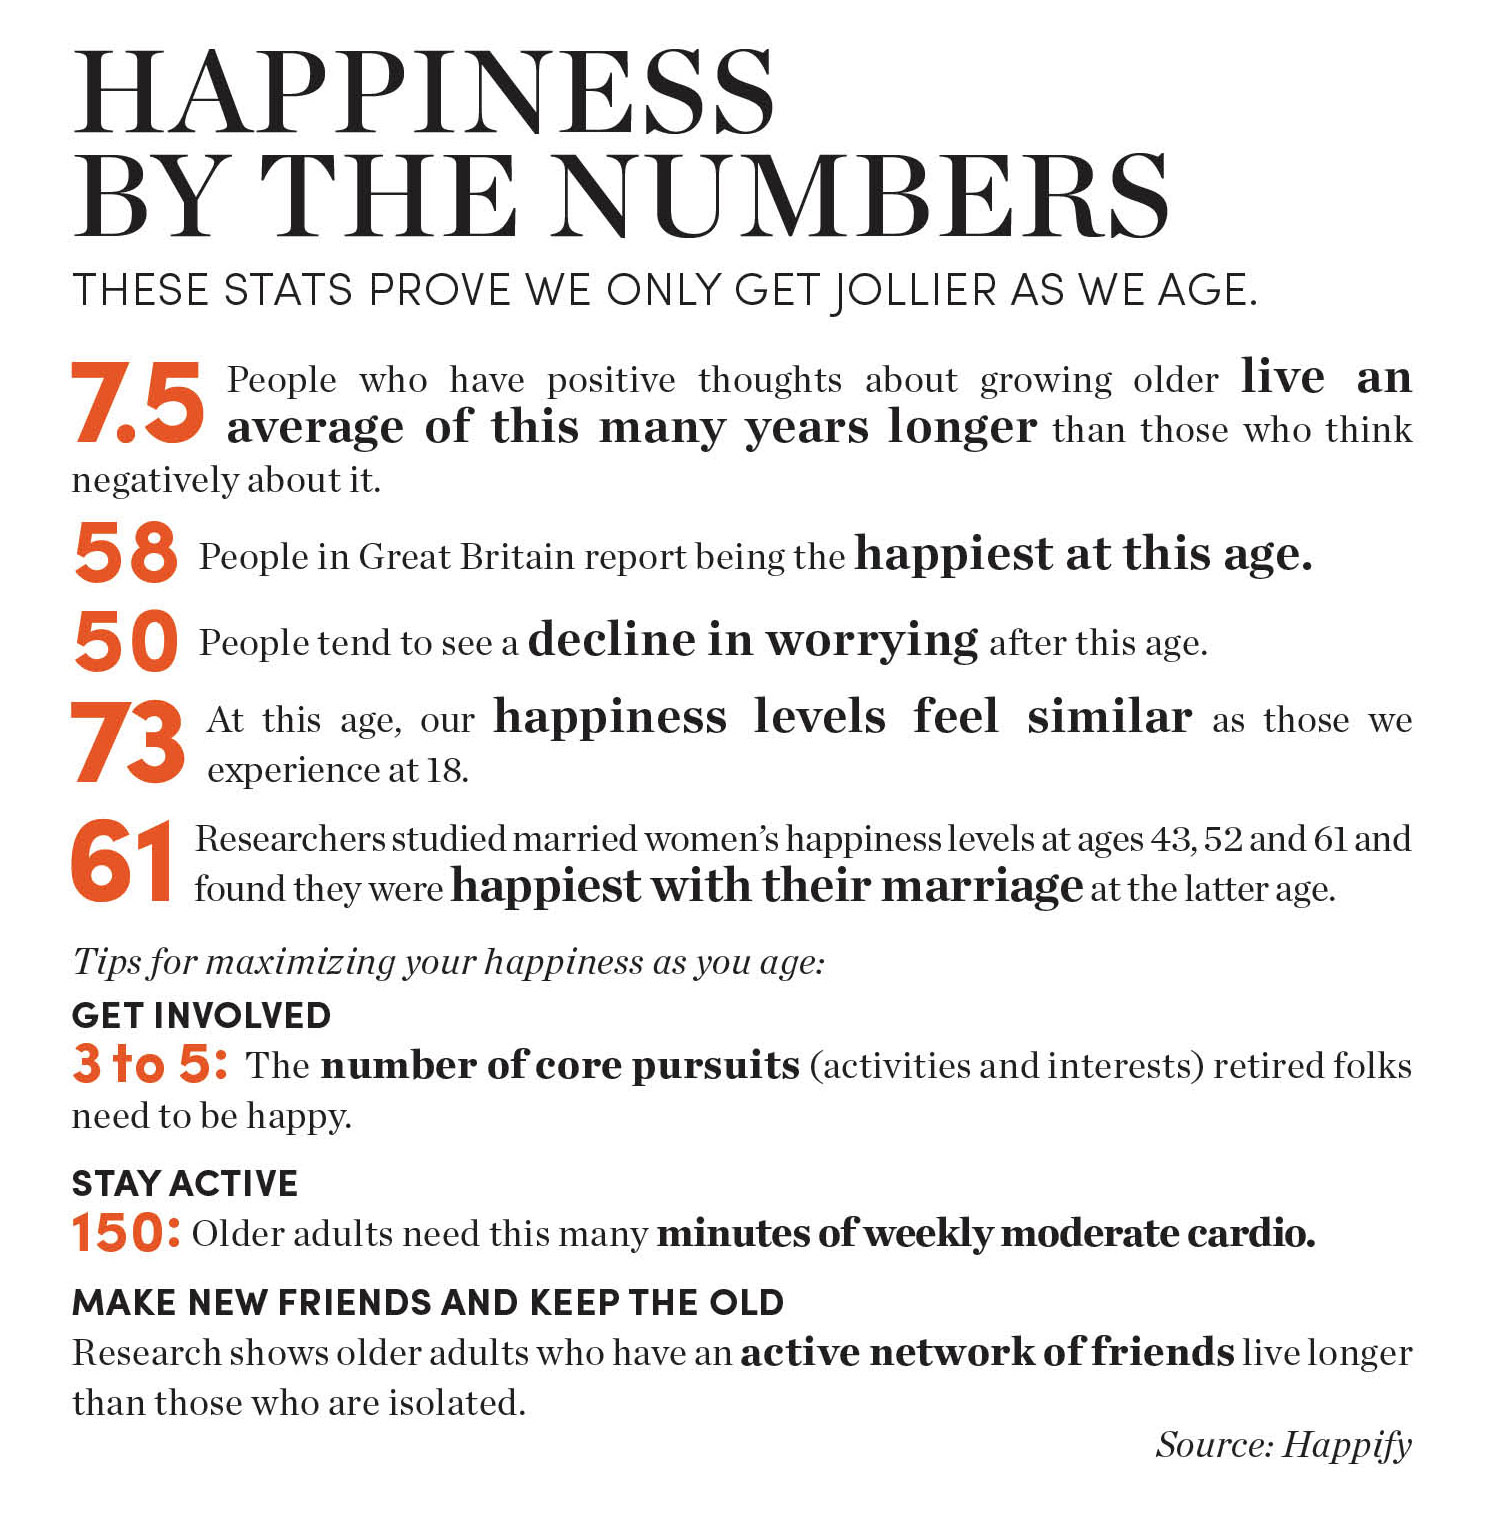 Happiness by the Numbers